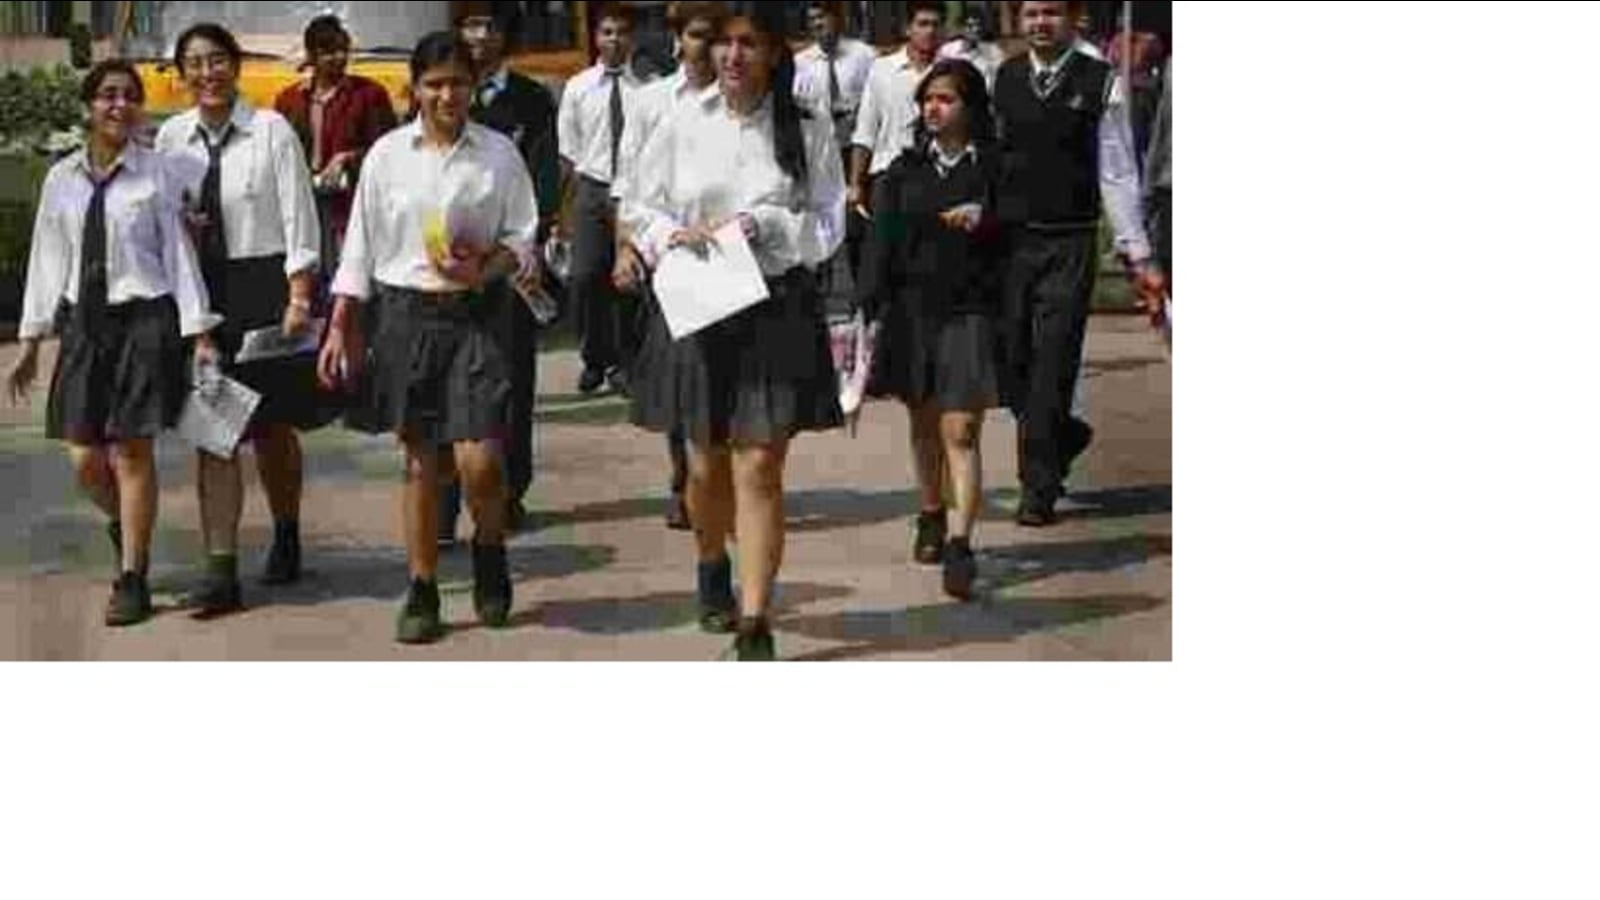 Kalkata Scool Girl X Video - Ban entry of students in school uniforms at public places during school  hours: SCPCR to DMs - Hindustan Times